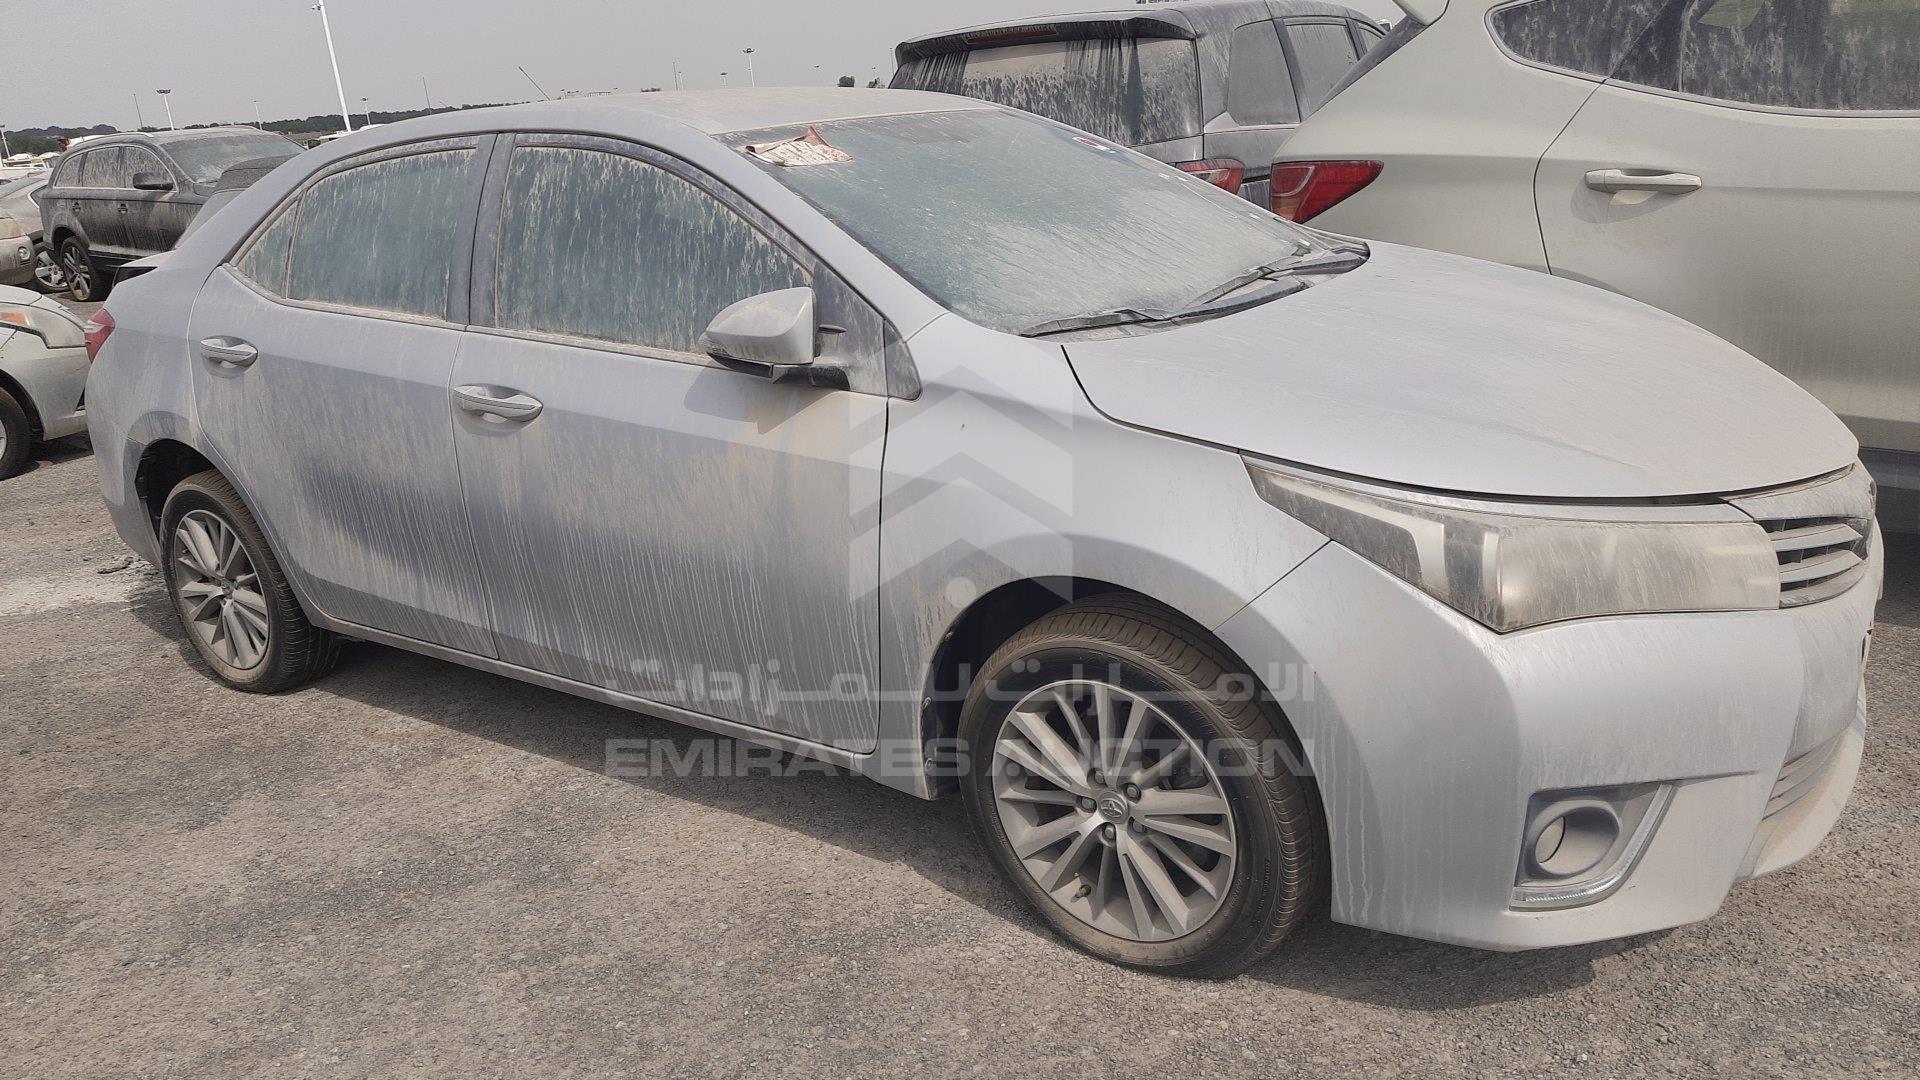 70 thoousands cars prices 4000 aed